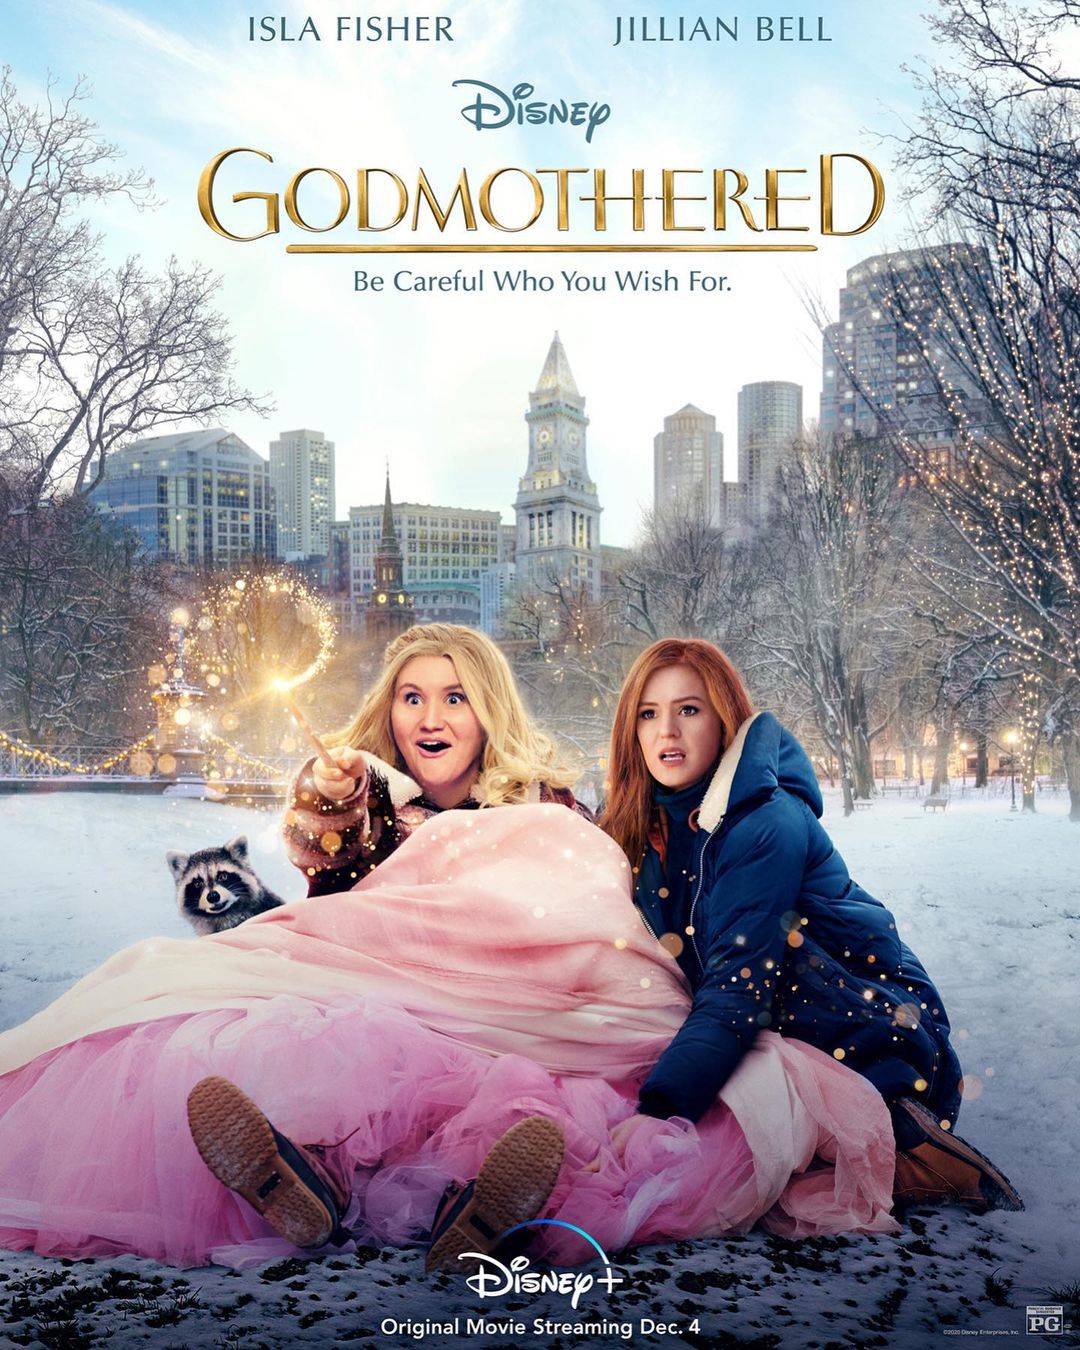 Disney+ Poster with Jillian Bell and Isla Fisher